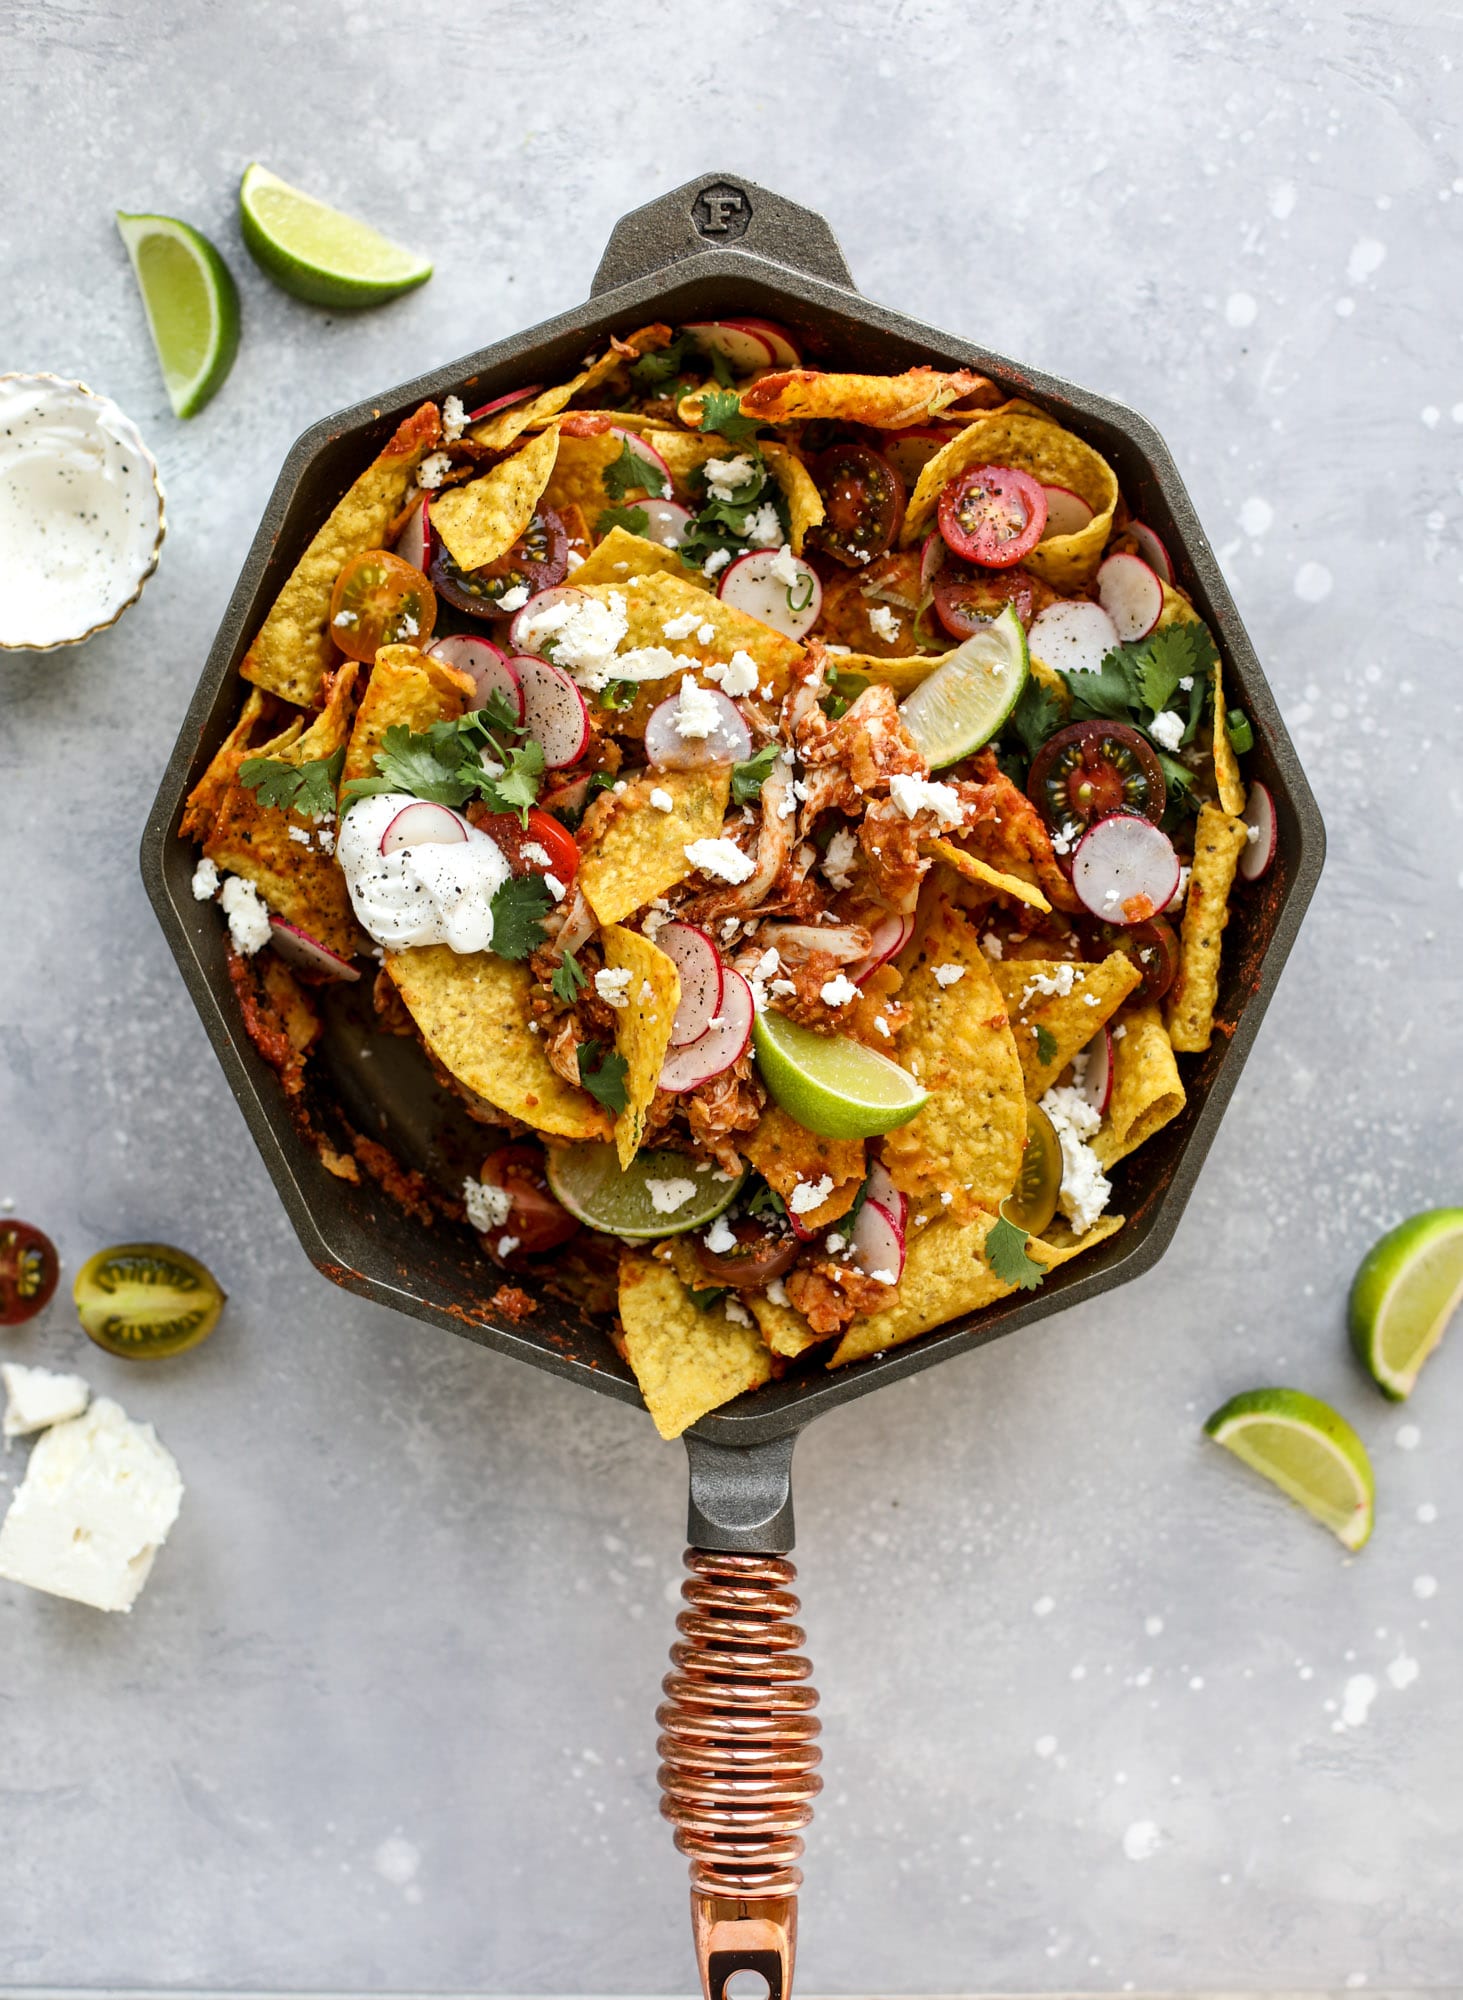 This skillet of fire roasted chicken chilaquiles is so easy, flavorful and delicious! A quick blender sauce made with fire roasted tomatoes, shredded chicken, lots of tortilla chips and your favorite toppings. Give me all the cheese and guacamole! I howsweeteats.com #chicken #chilaquiles #recipe #easy #dinner